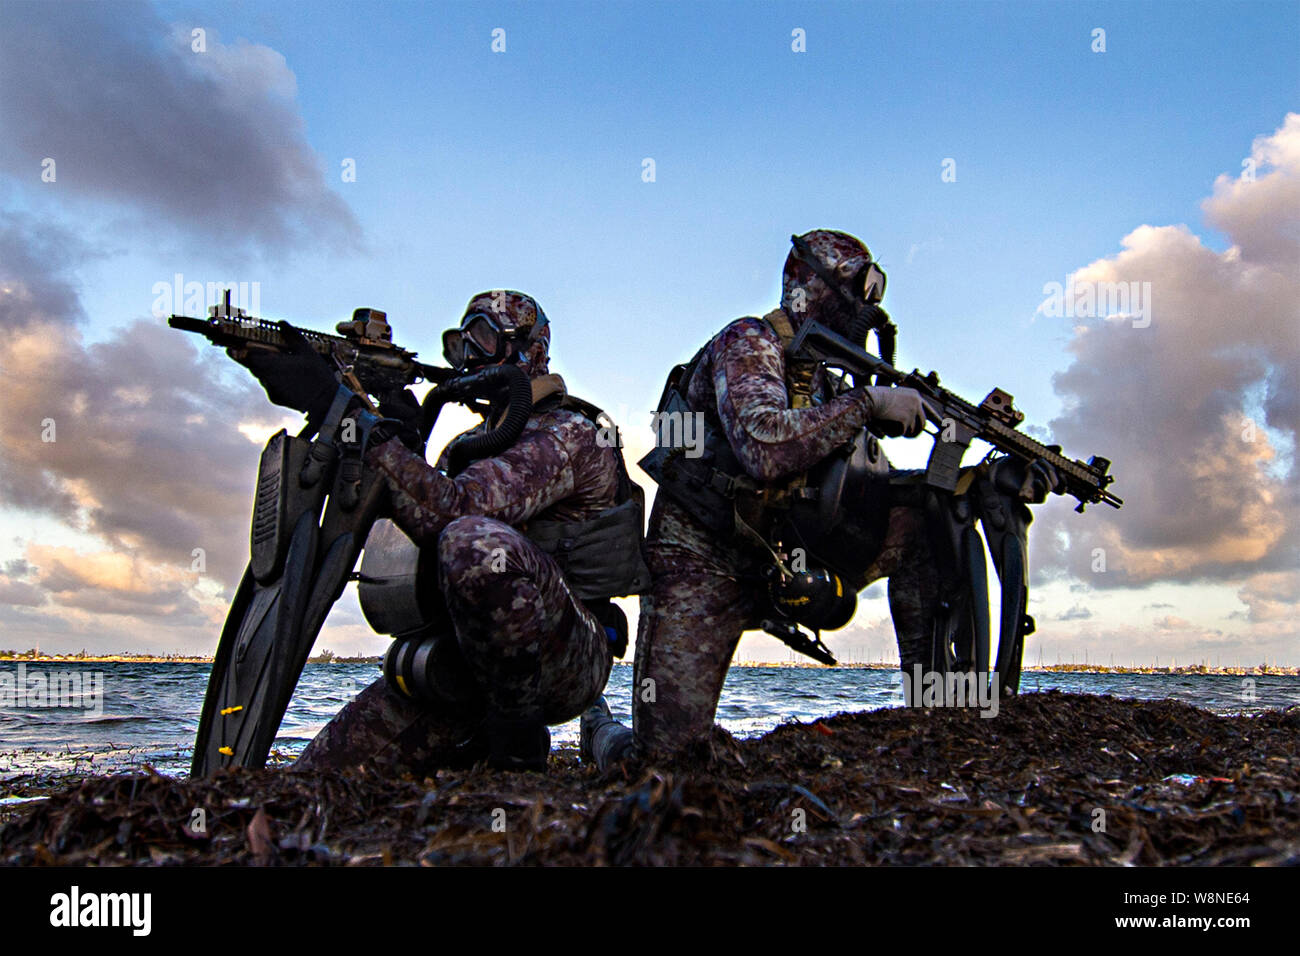 US Navy SEALs assigned to Naval Special Warfare Group 2 are pictured conducting military dive operations off the East Coast of the United States on May 29 2019. SEALs, the maritime component of US Special Forces, are trained to conduct missions from sea, air and land and engage in a continuous training cycle to improve and further specialize skills needed during deployments across the globe. Stock Photo